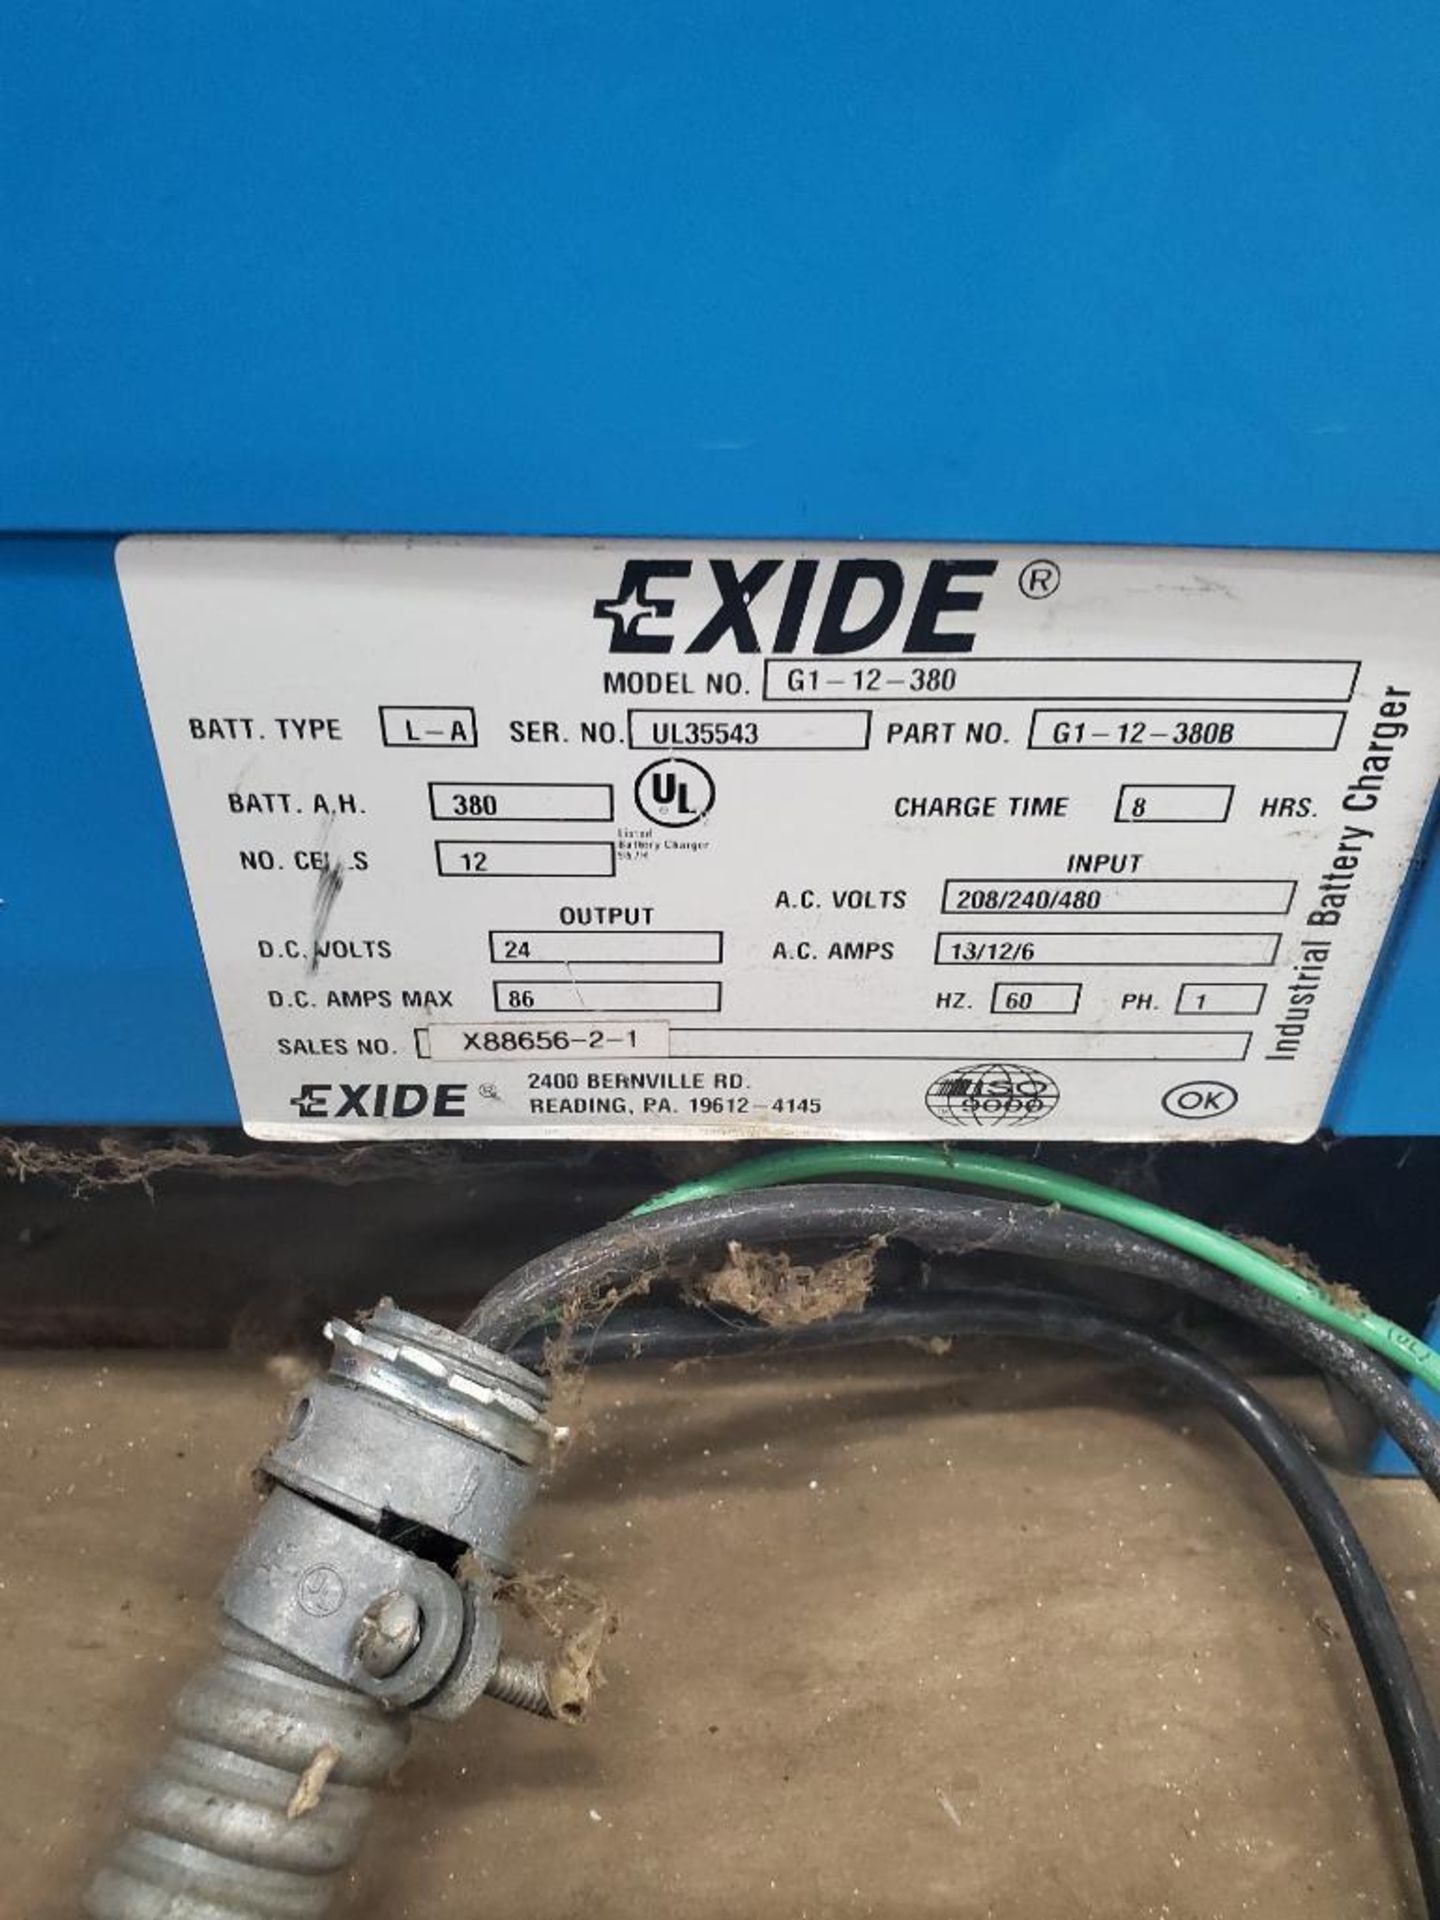 EXIDE BATTERY CHARGER; MODEL G1-12-380, S/N UL35543, BATTERY TYPE LA, NO. CELL 12, 24-VOLTS *** - Image 2 of 2